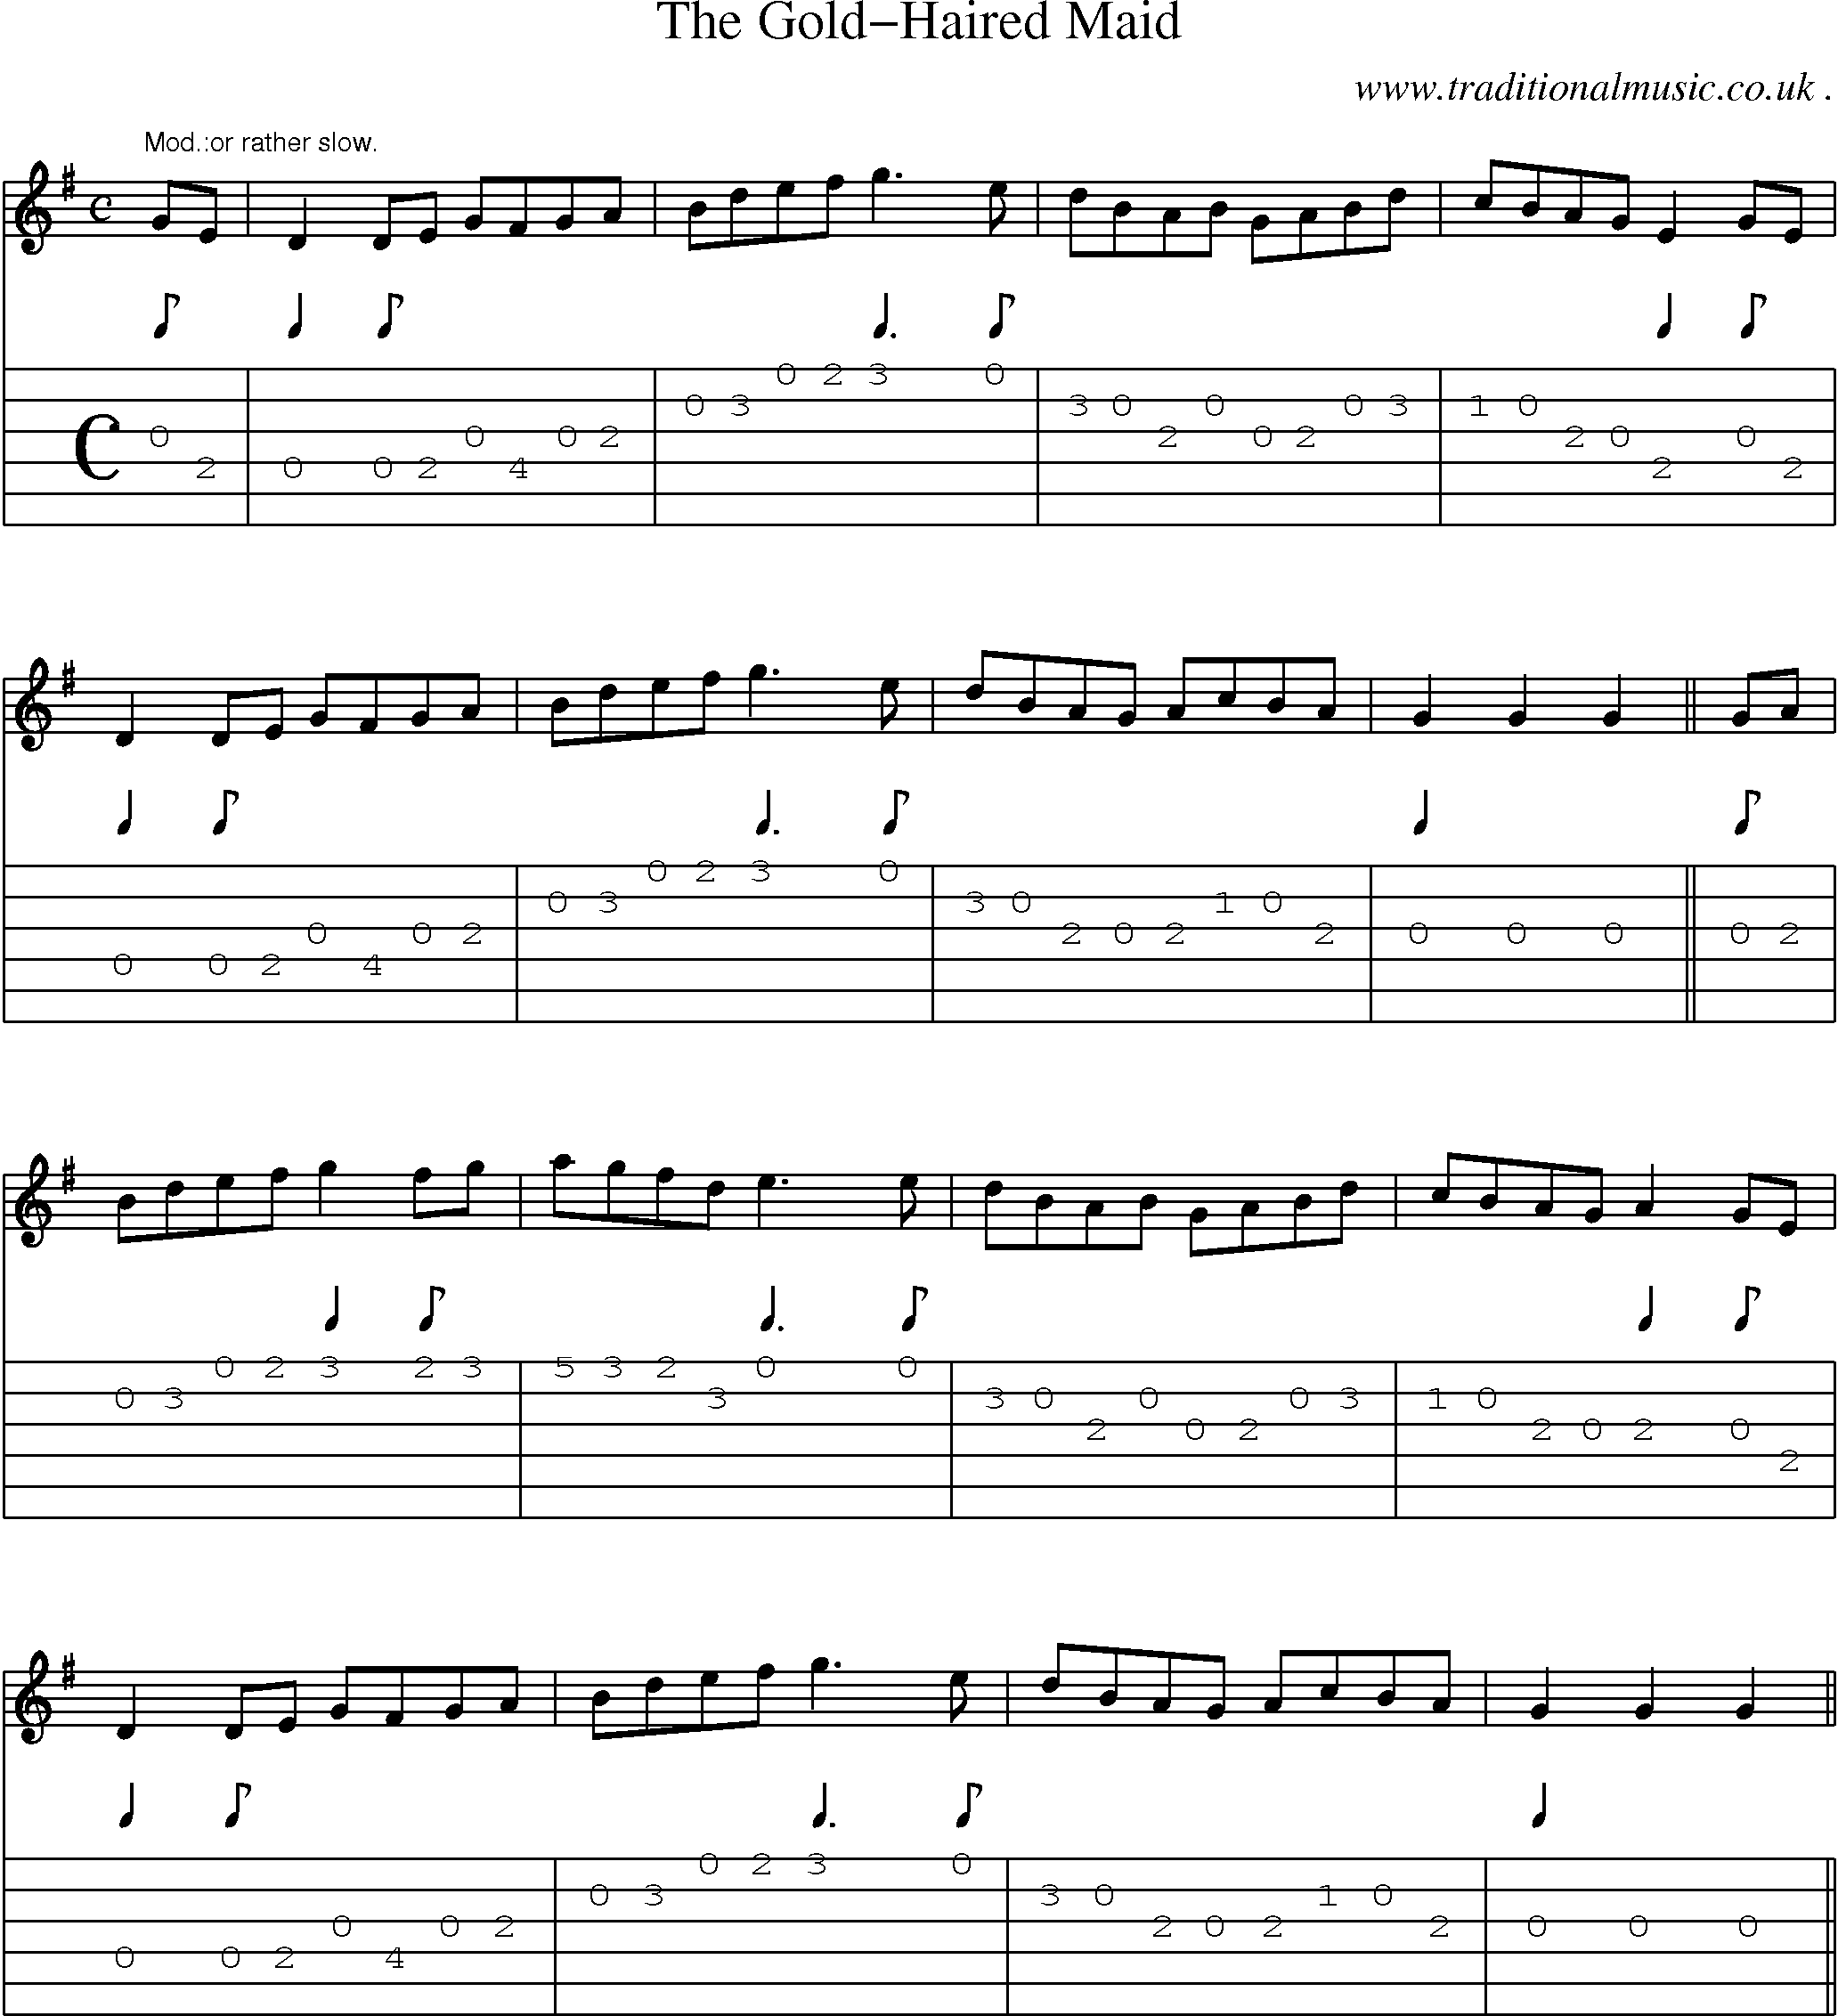 Sheet-Music and Guitar Tabs for The Gold-haired Maid